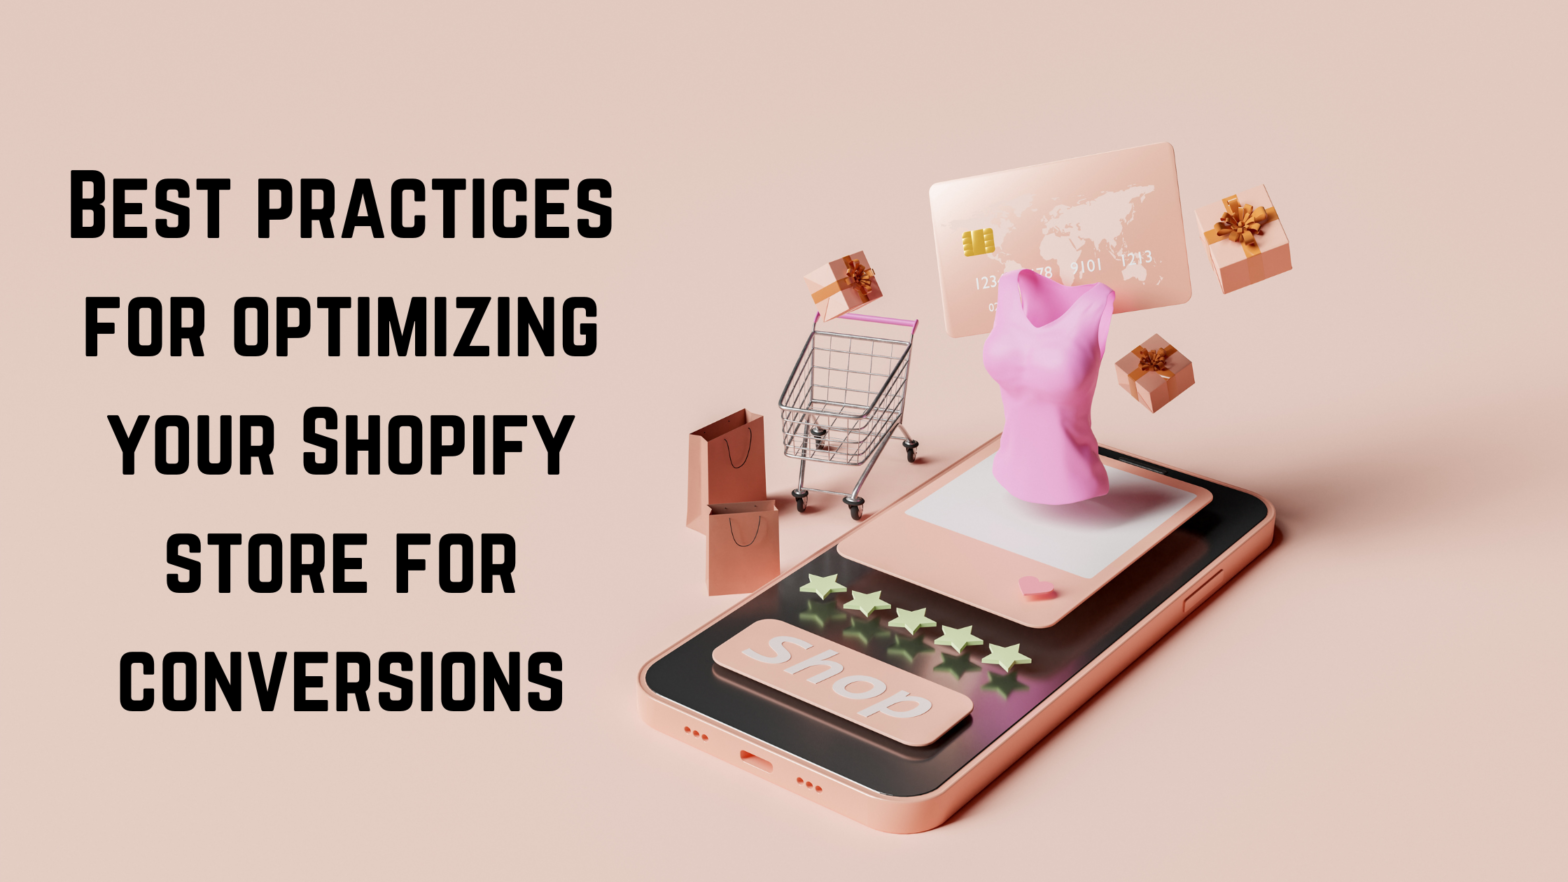 featured image: Optimizing Shopify Store | Digitalpro.fit